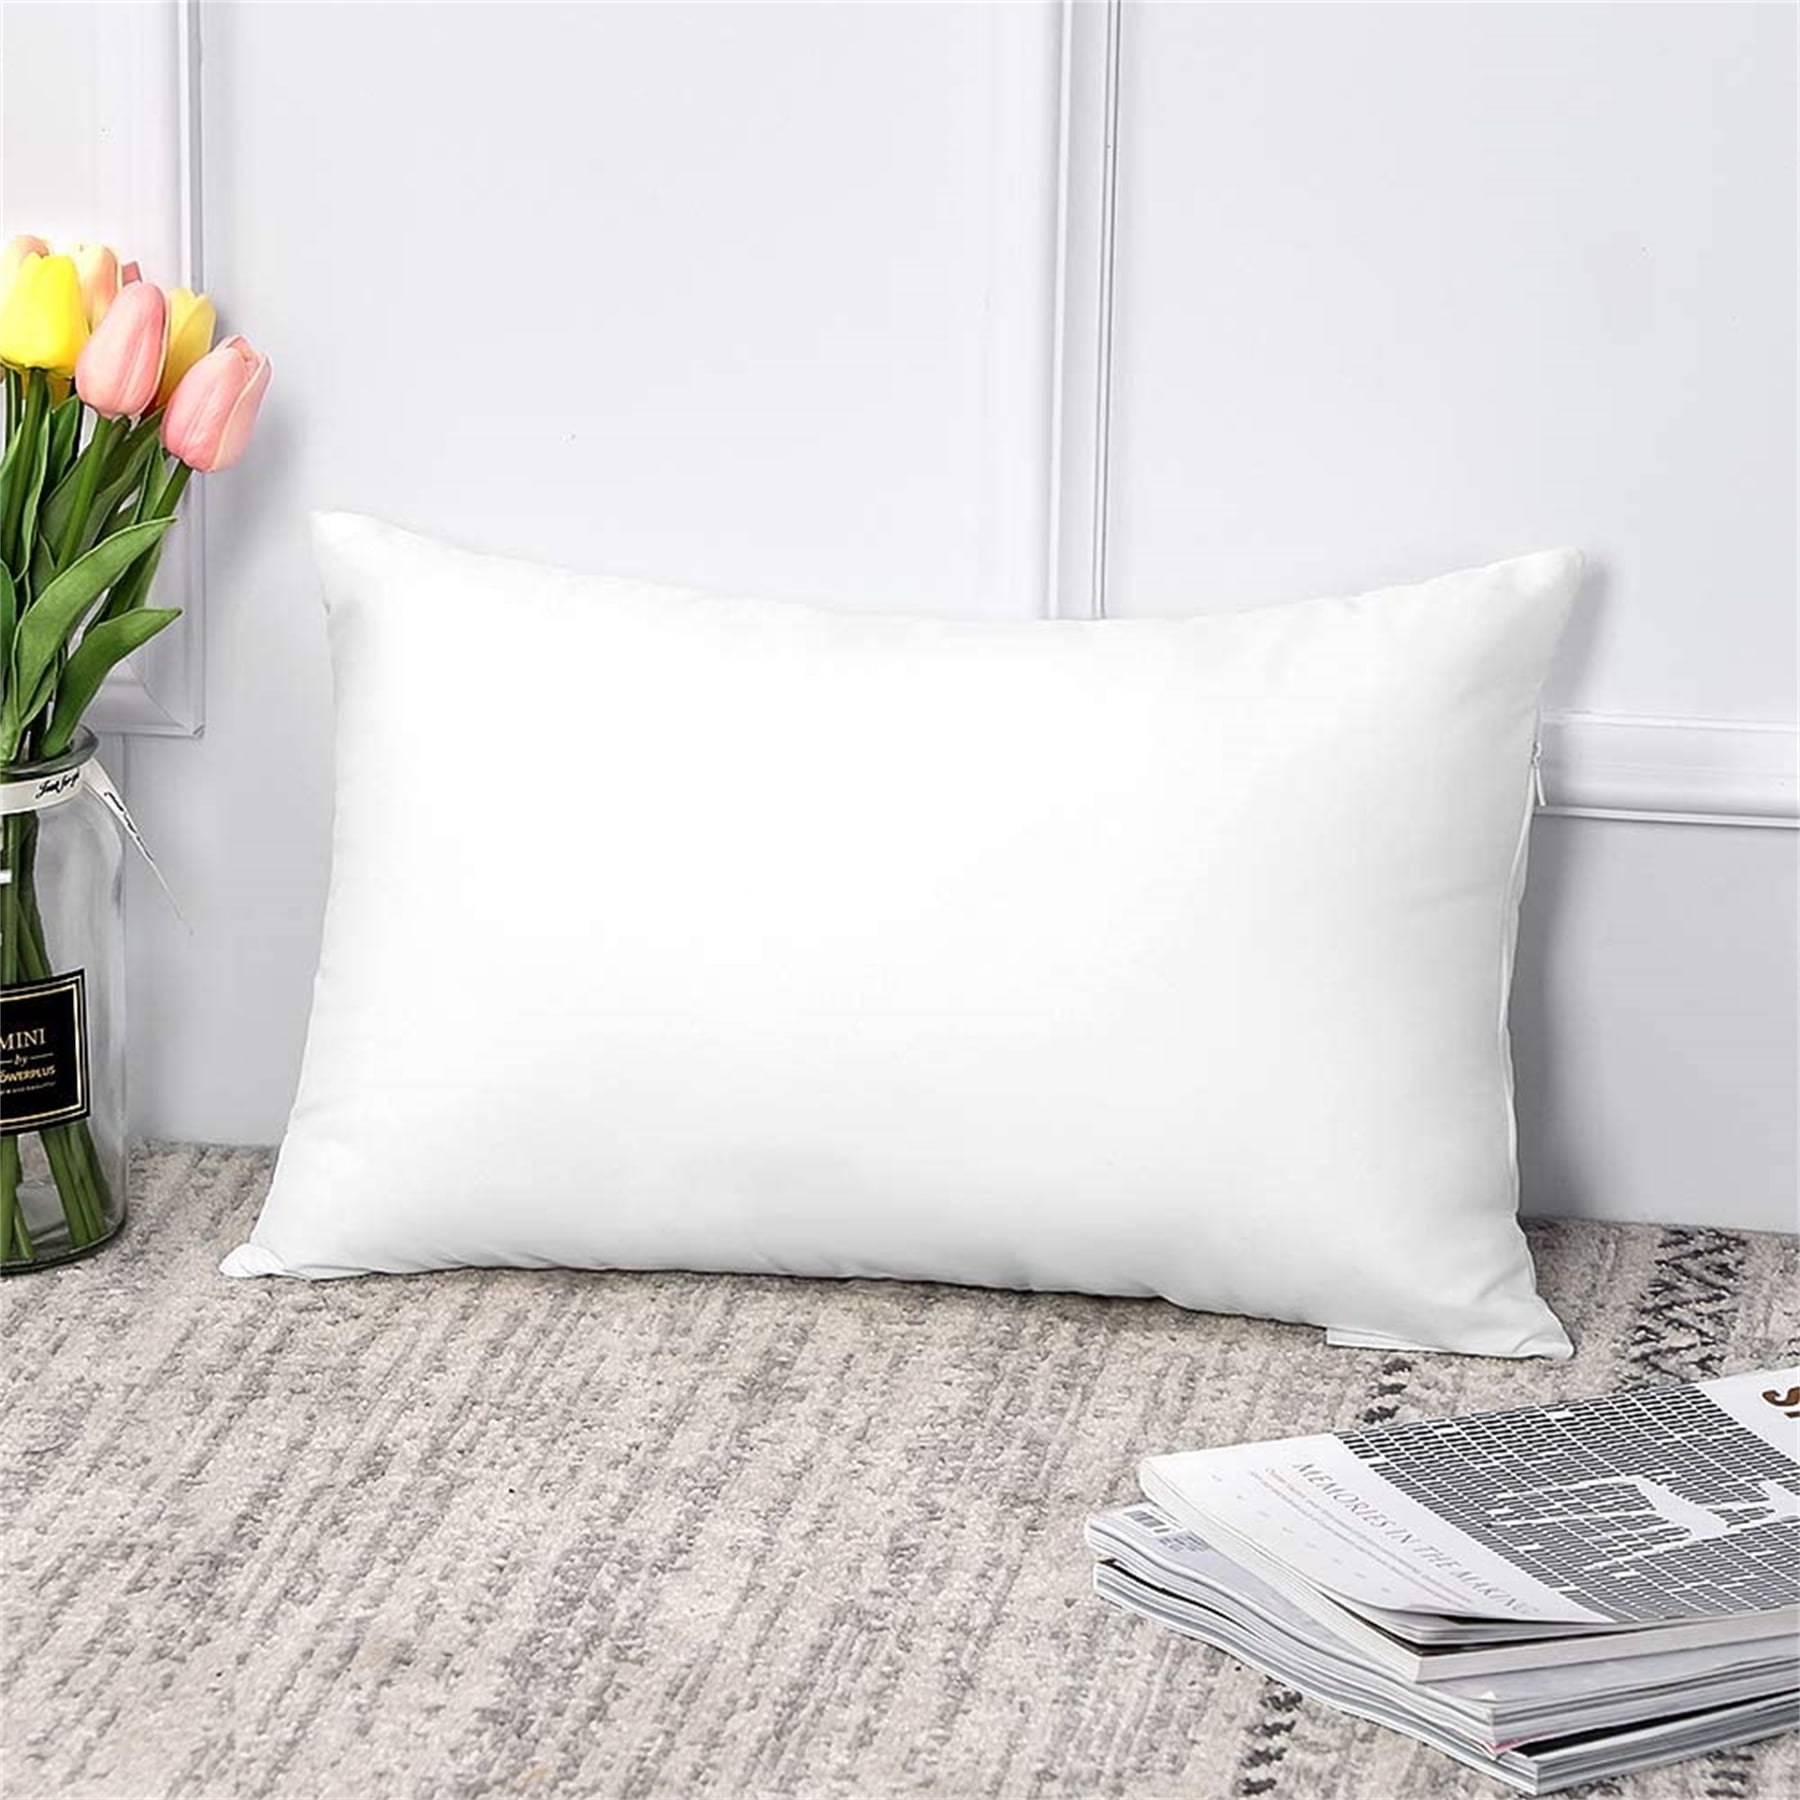 Utopia Bedding Throw Pillows Insert (Pack of 2, White) - 26 x 26 Inches Bed  and Couch Pillows - Indoor Decorative Pillows